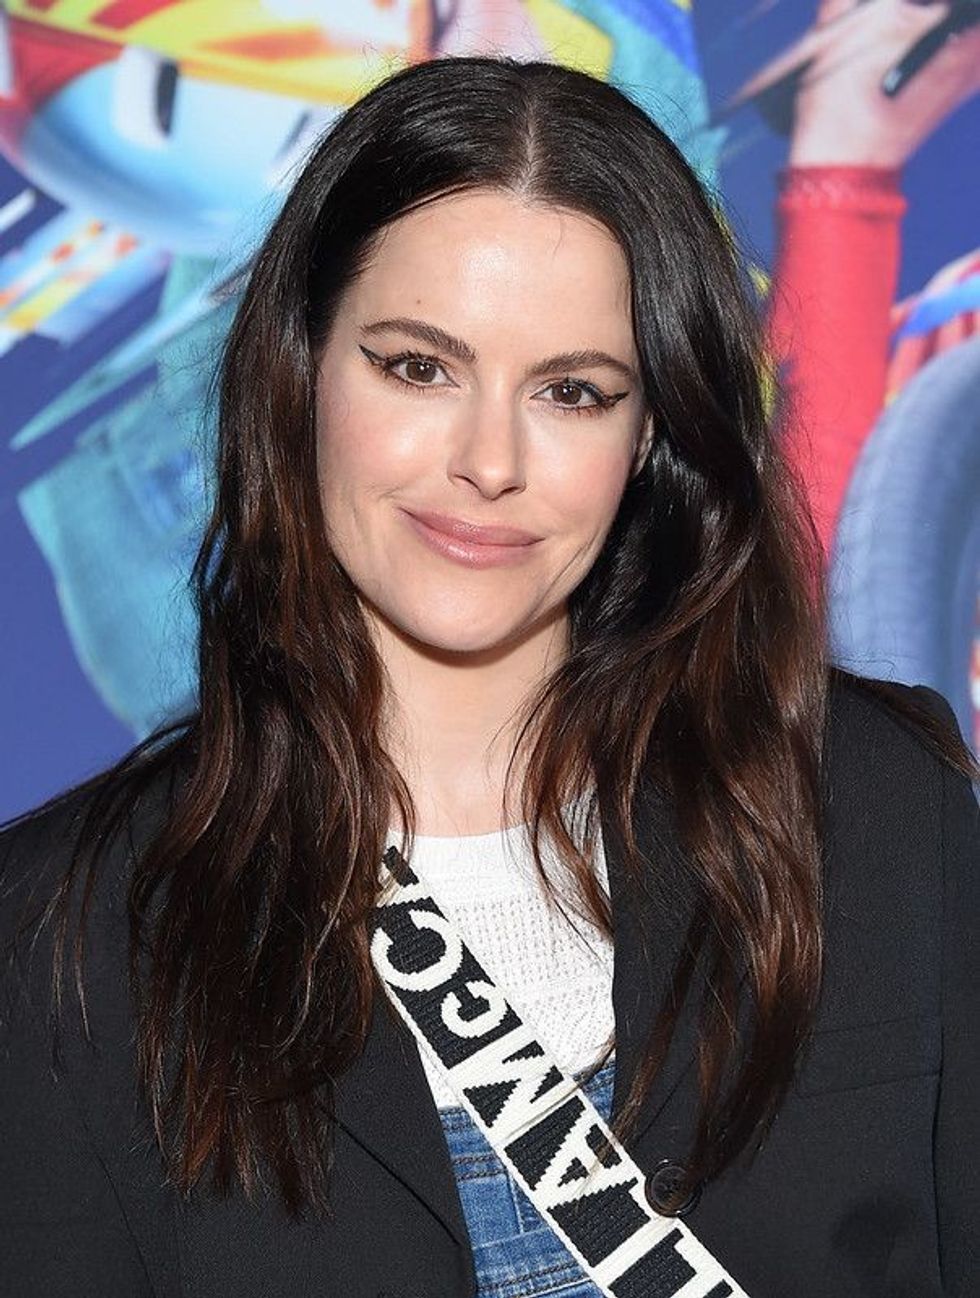 Emily Hampshire, who was born in August, hails from Canada.